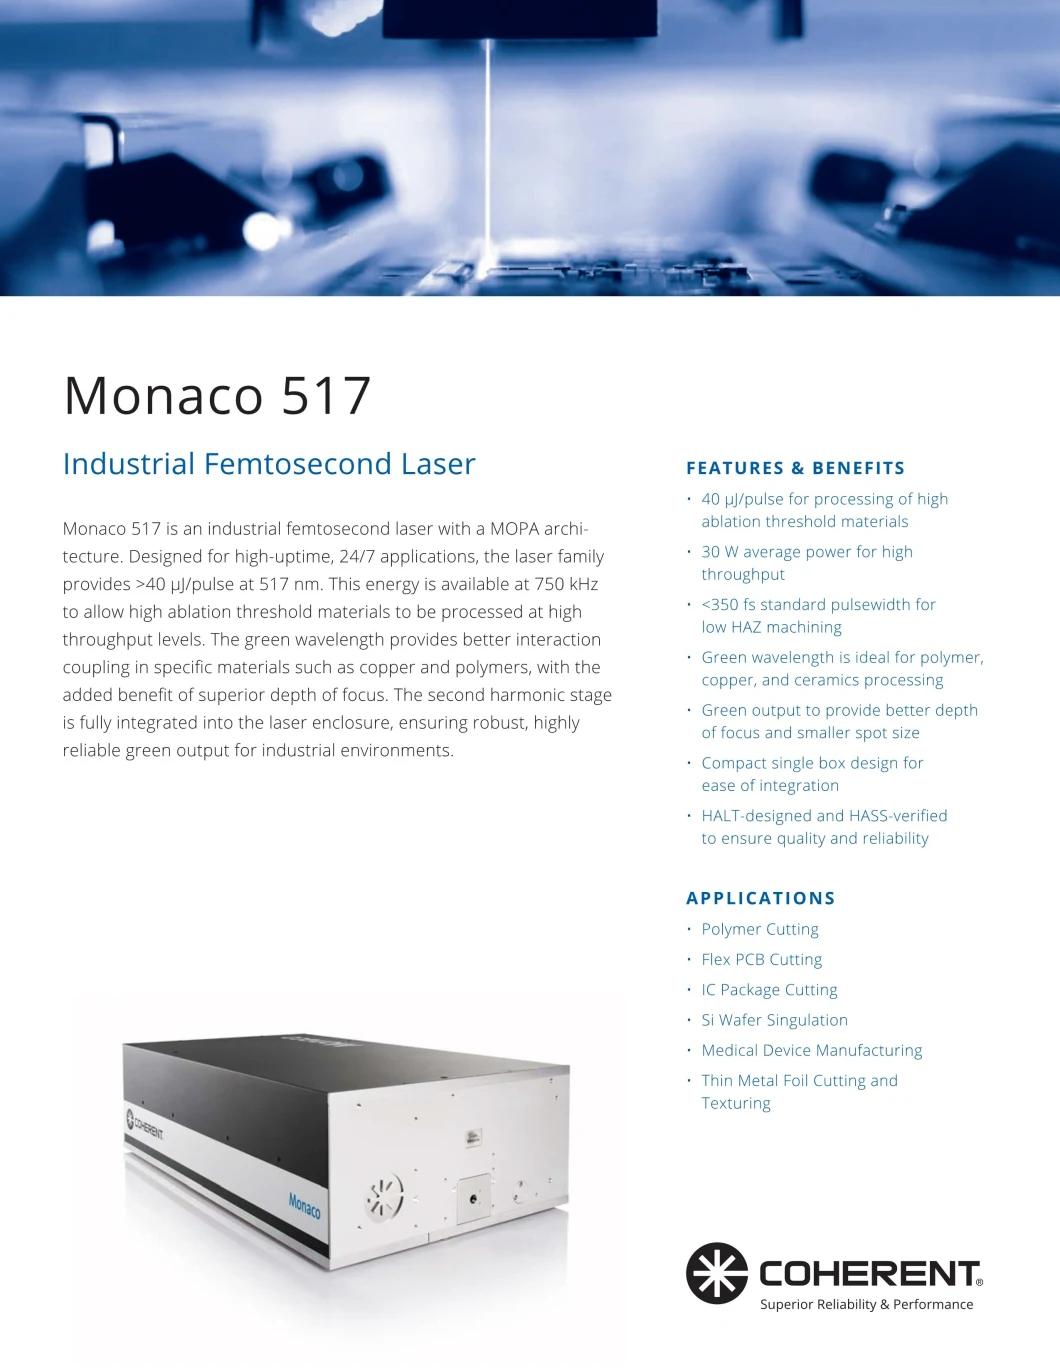 Used Coherent Ultrashort Pulse Lasers, Monaco 517-40-30 Advanced, High-Power Femtosecond Lasers